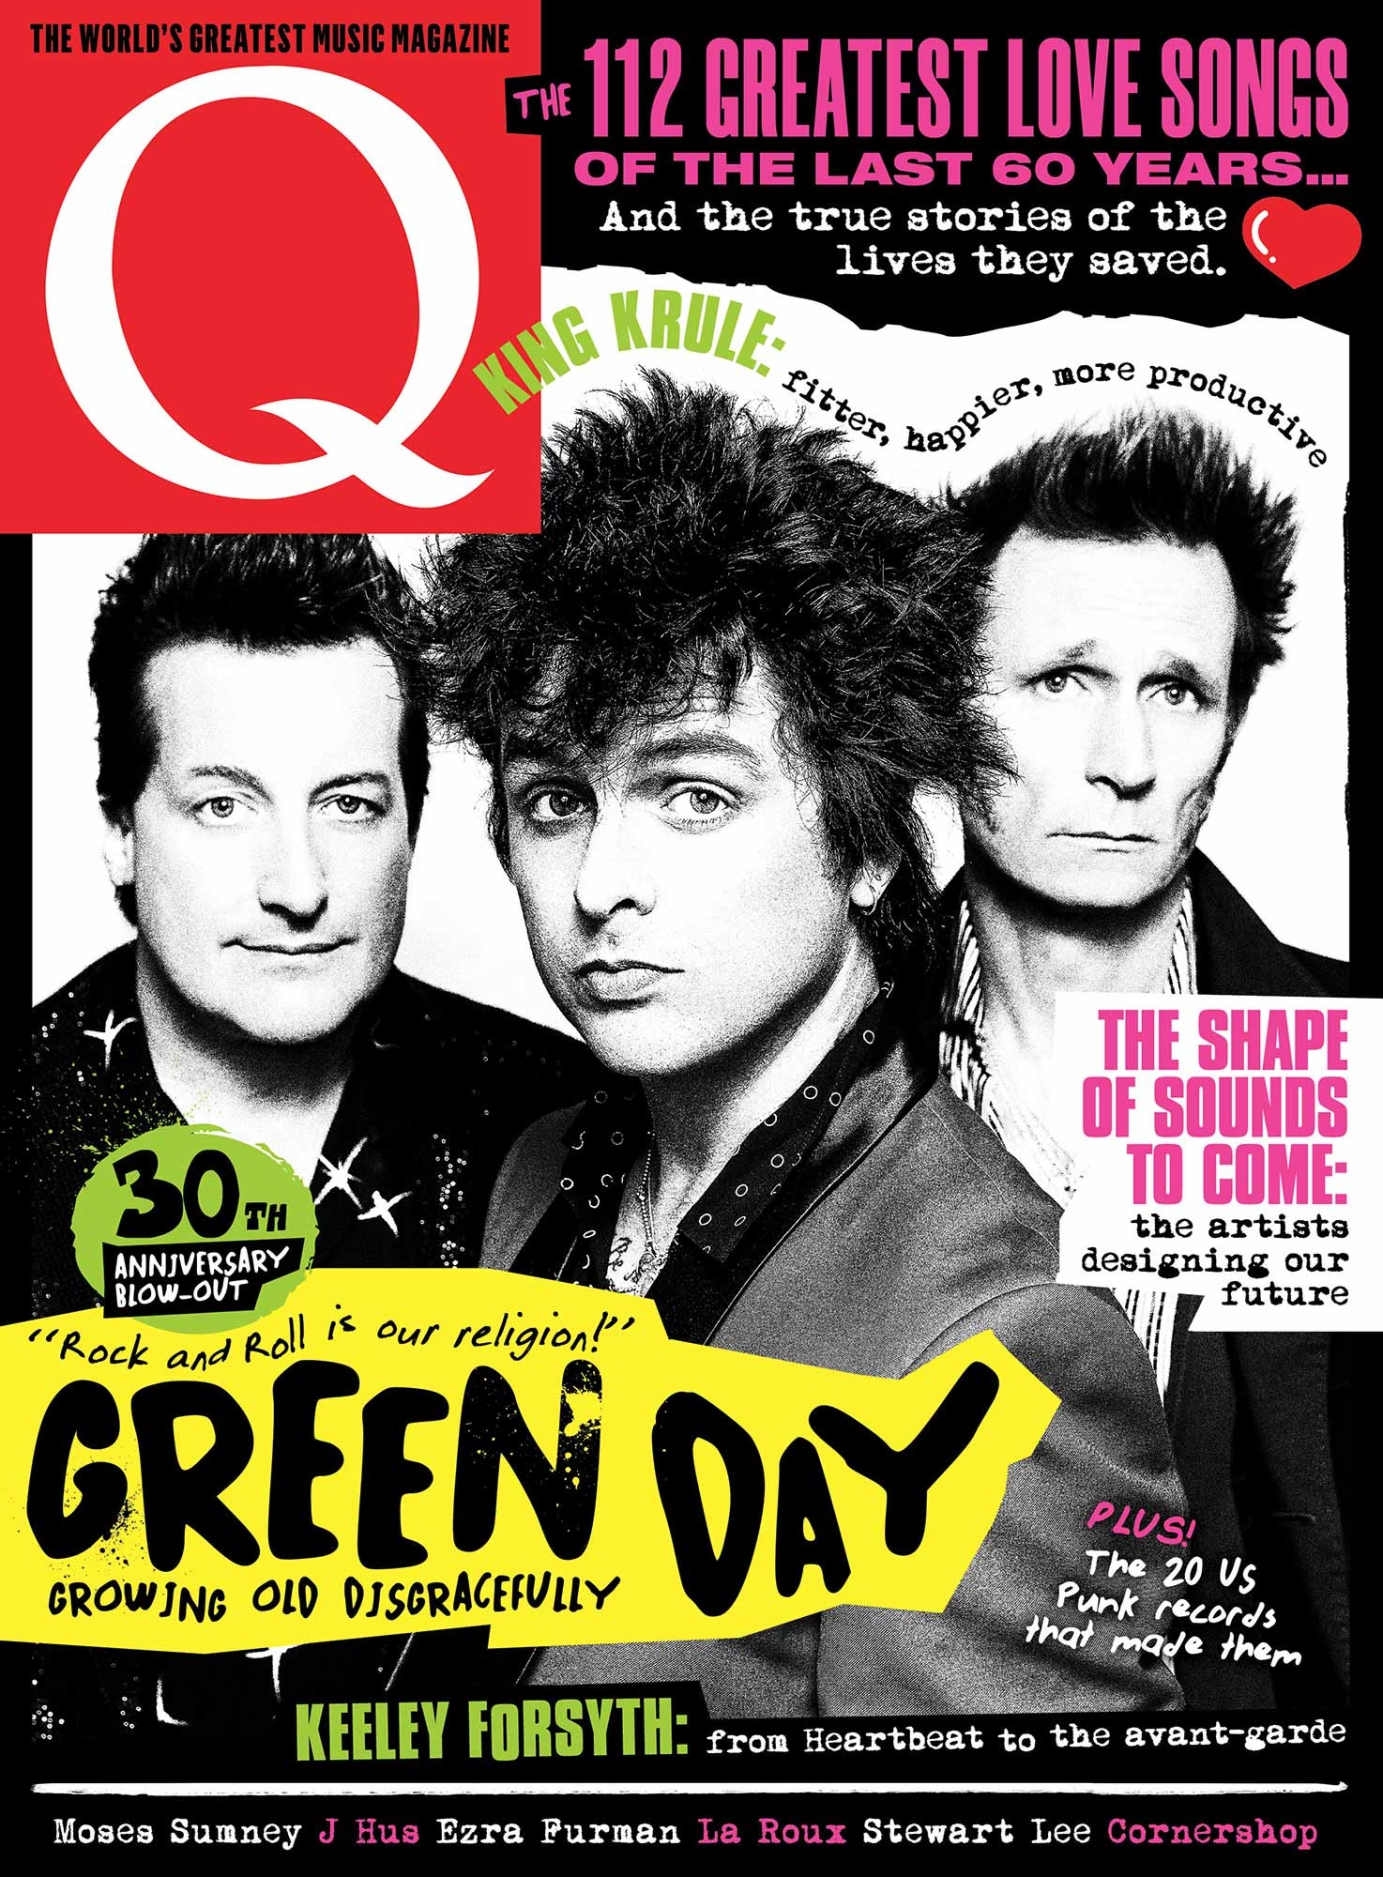 Cover feature of Green Day for Q magazine